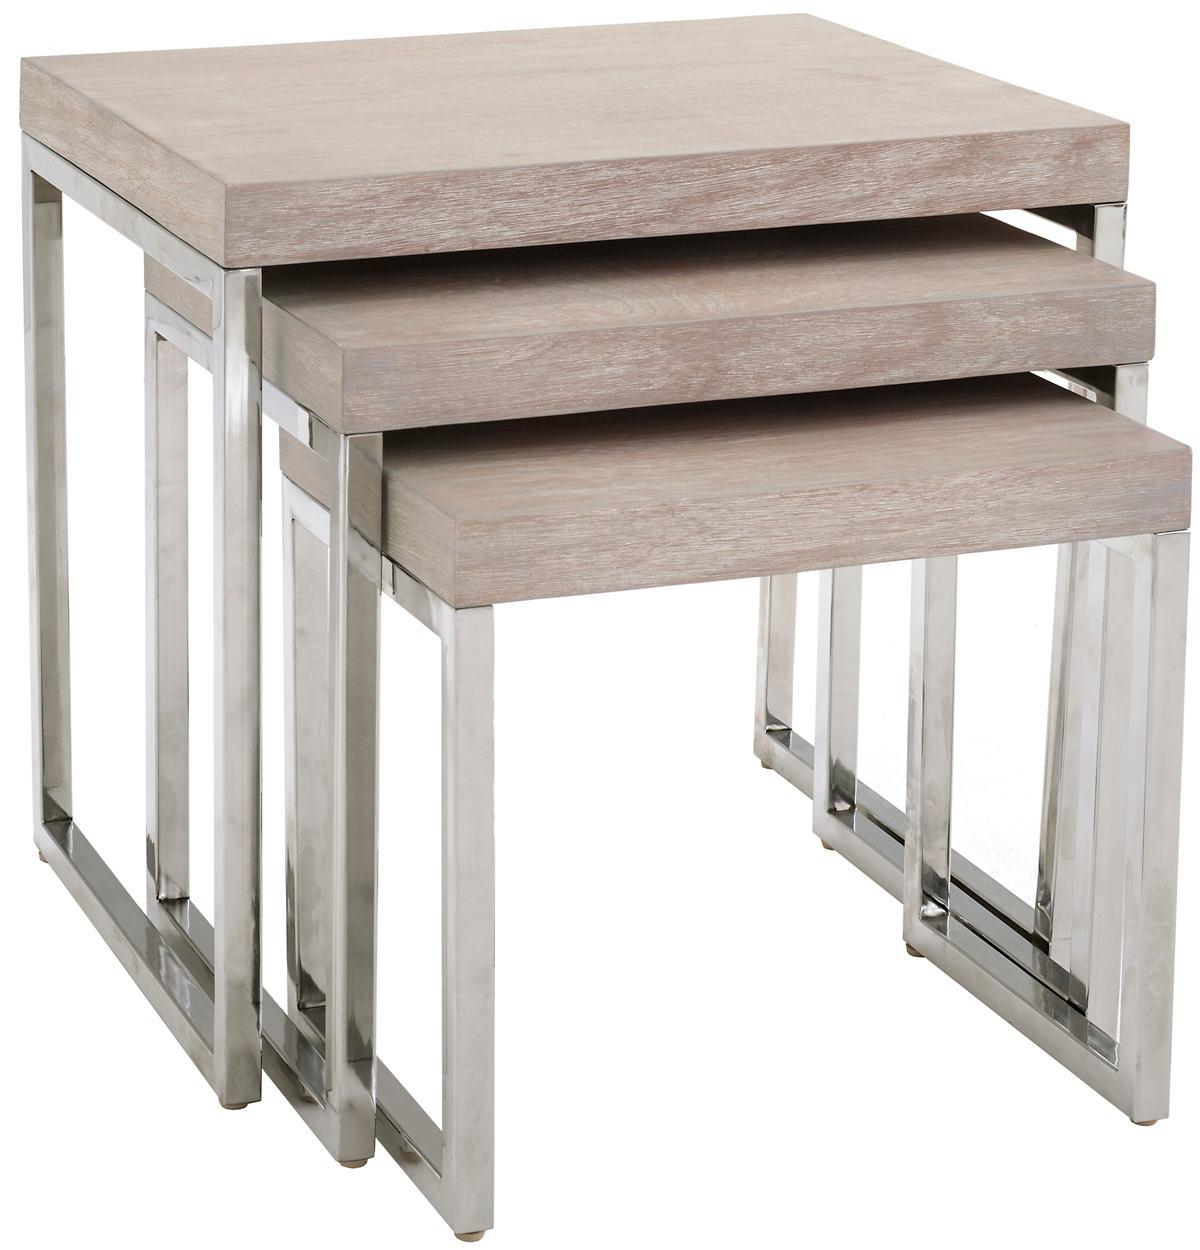 Nesting Tables Trilogy Wood Nesting Tables/Set Of 3 | The Outlet